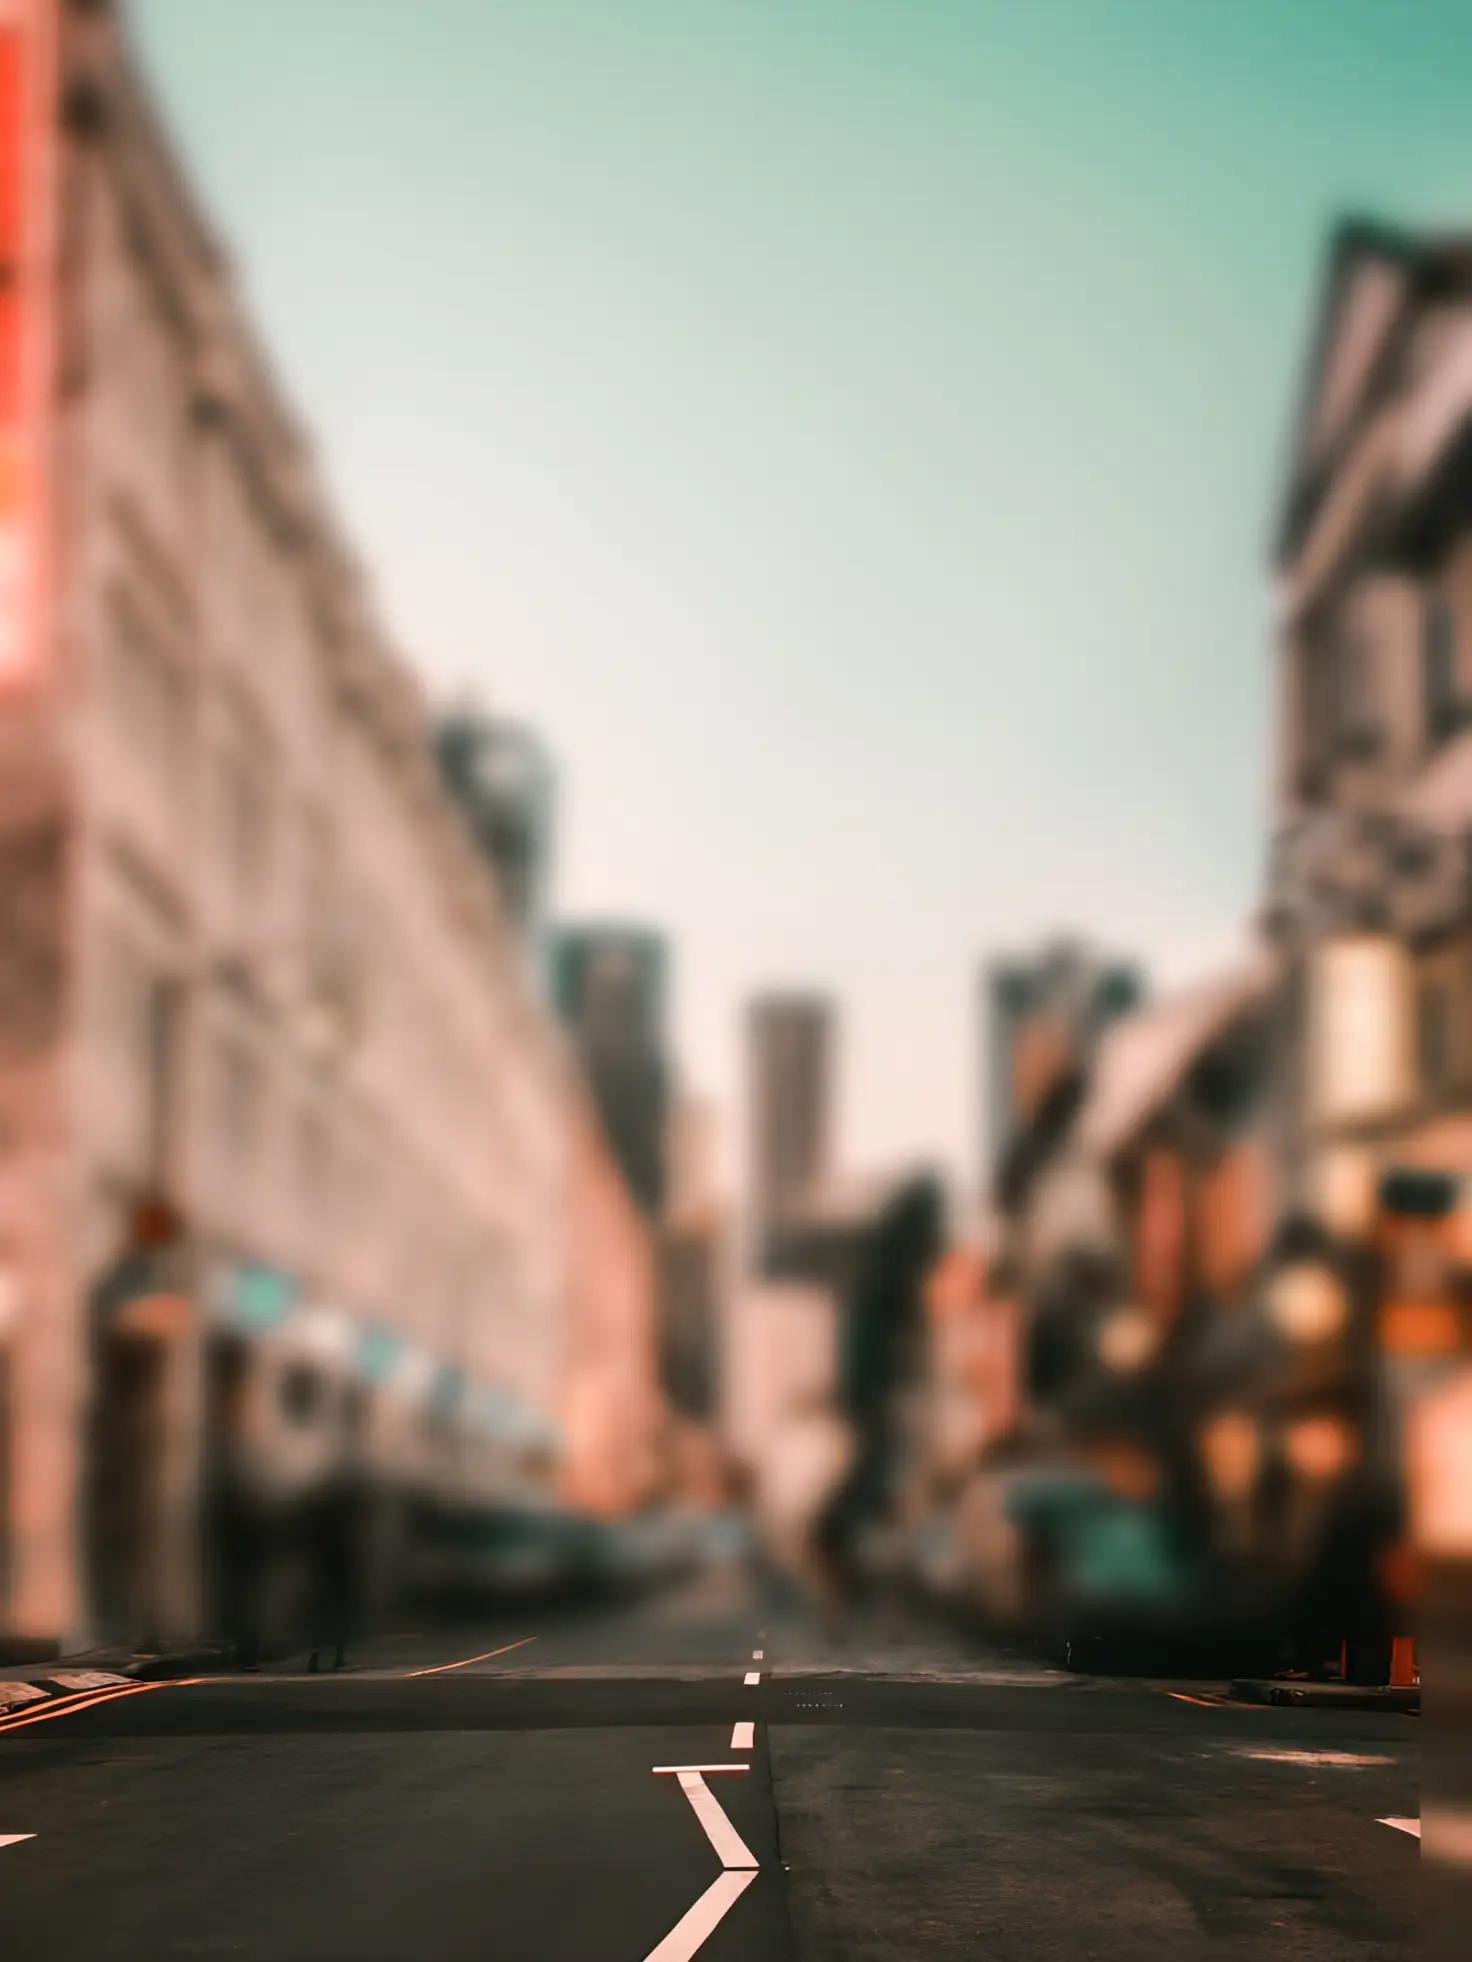 You are currently viewing Blur road with building background download